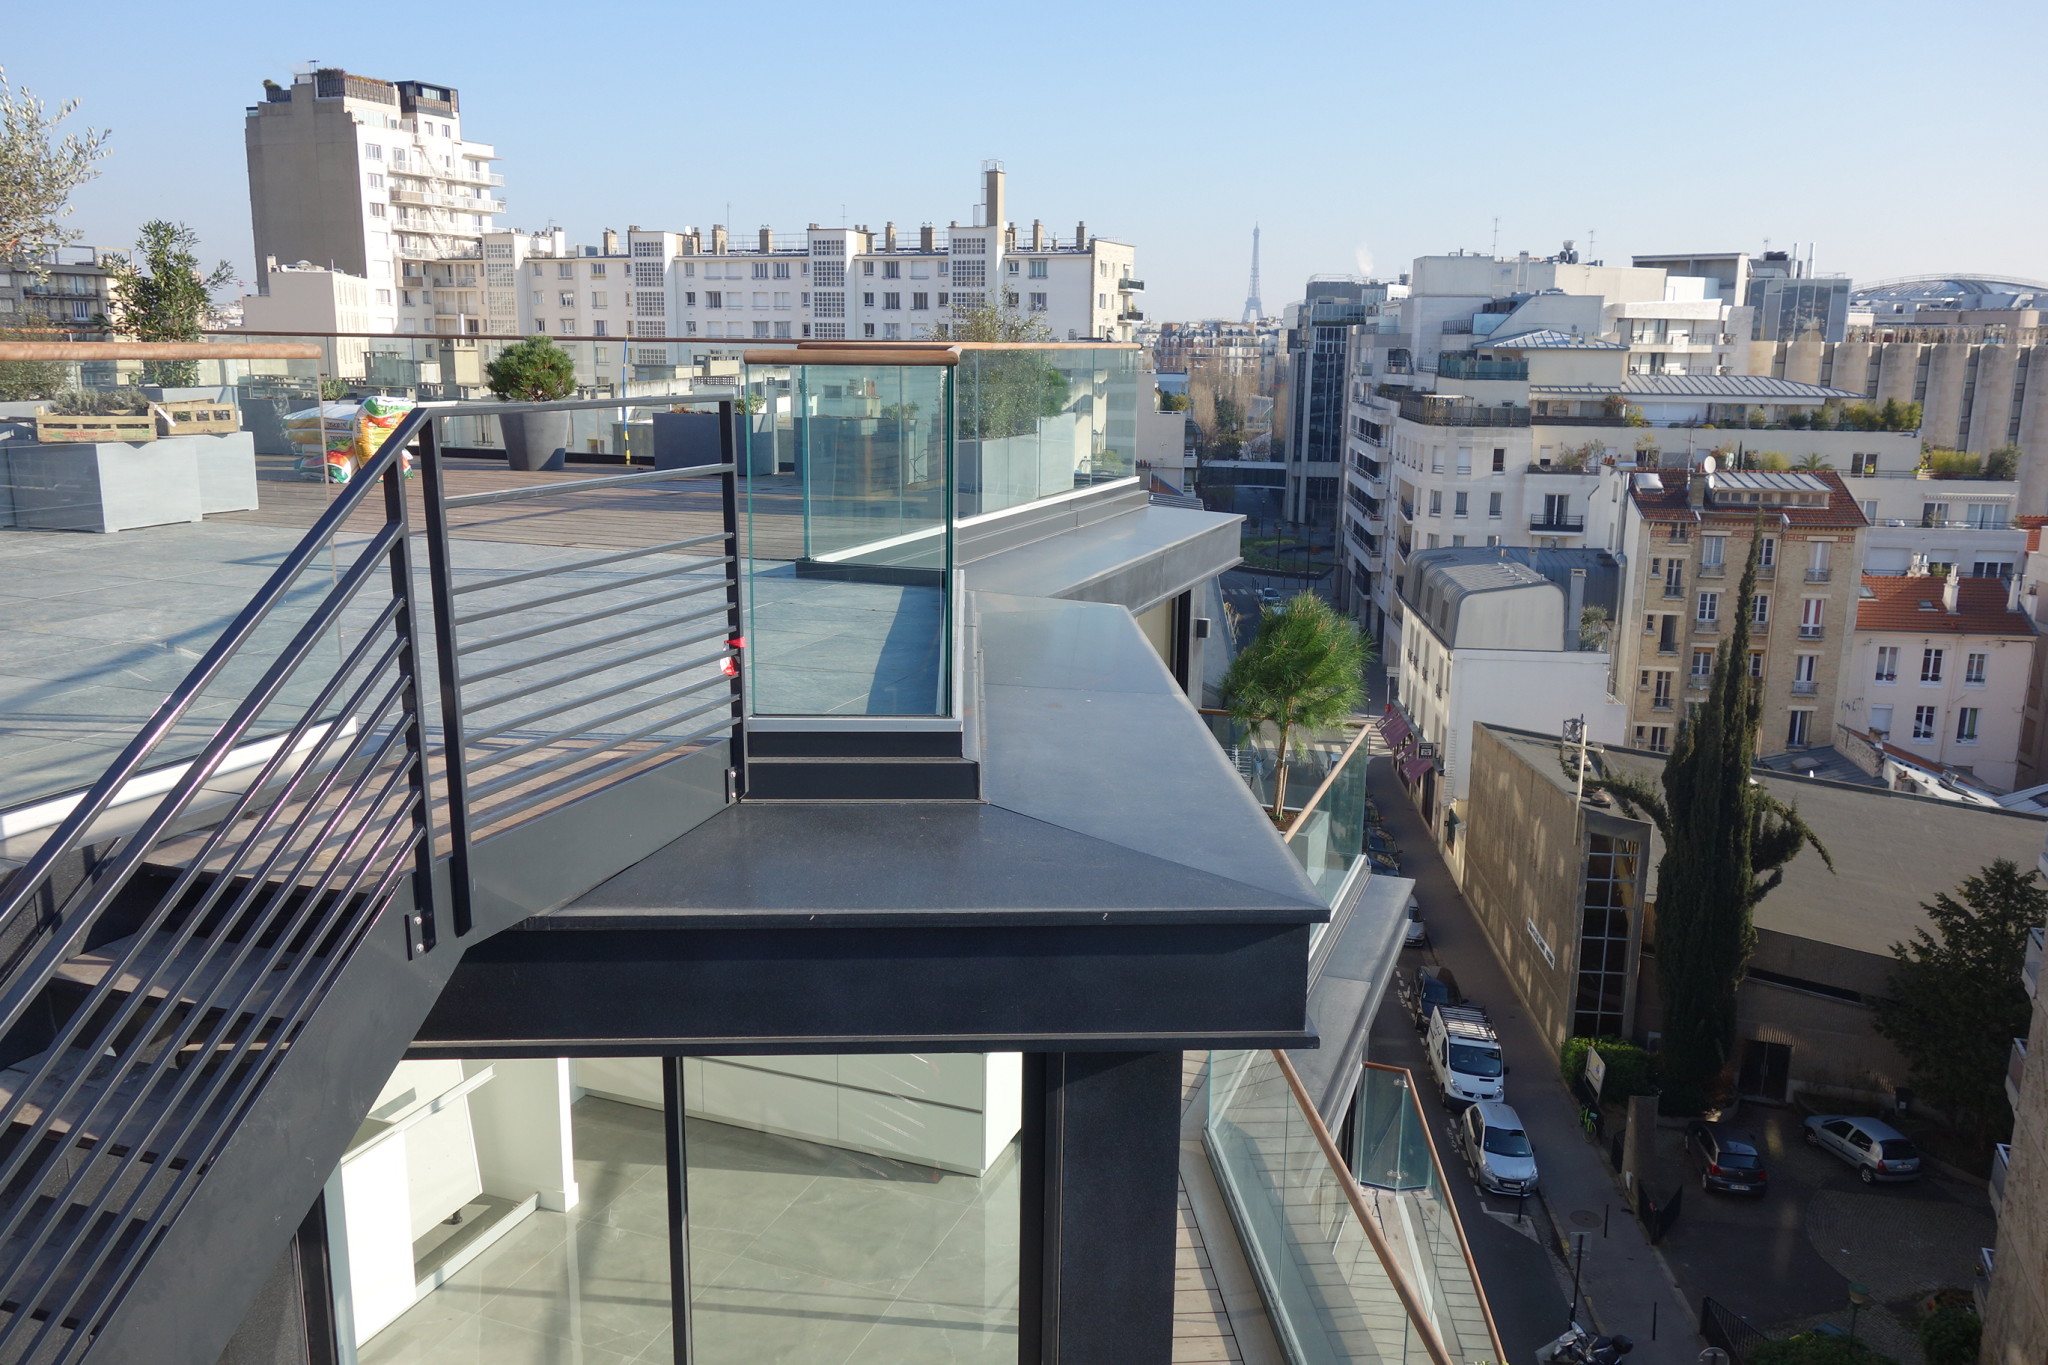 2017 realization : Paris’ roofs while remaining safe. | My Laminated Glass